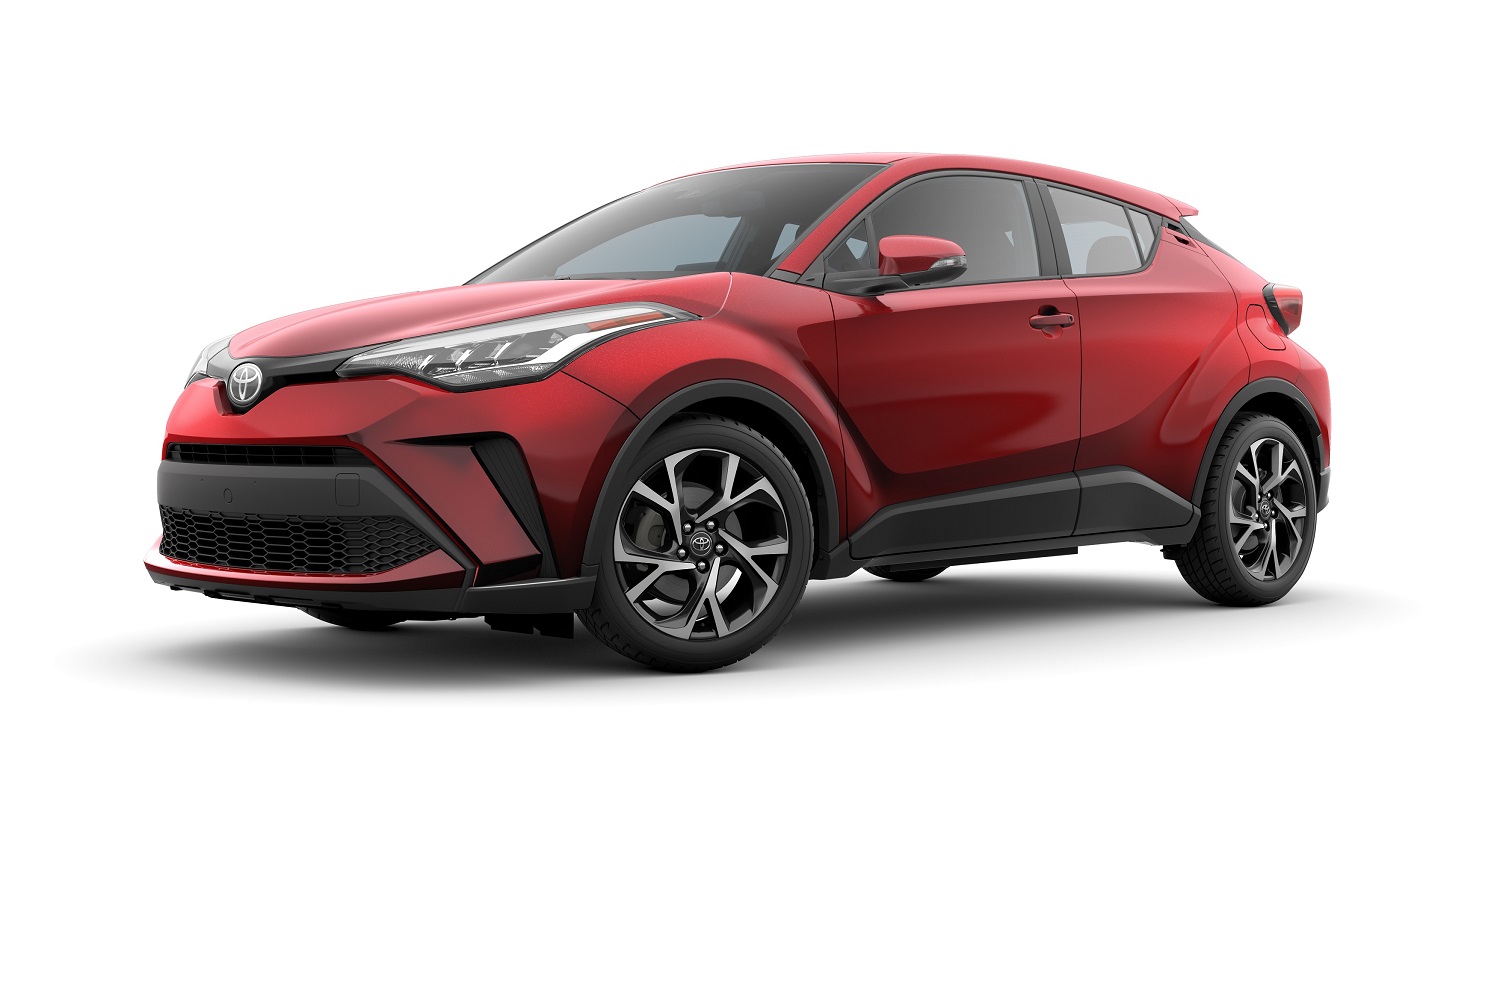 2020 toyota c hr crossover gets standard android auto compatibility chr 02